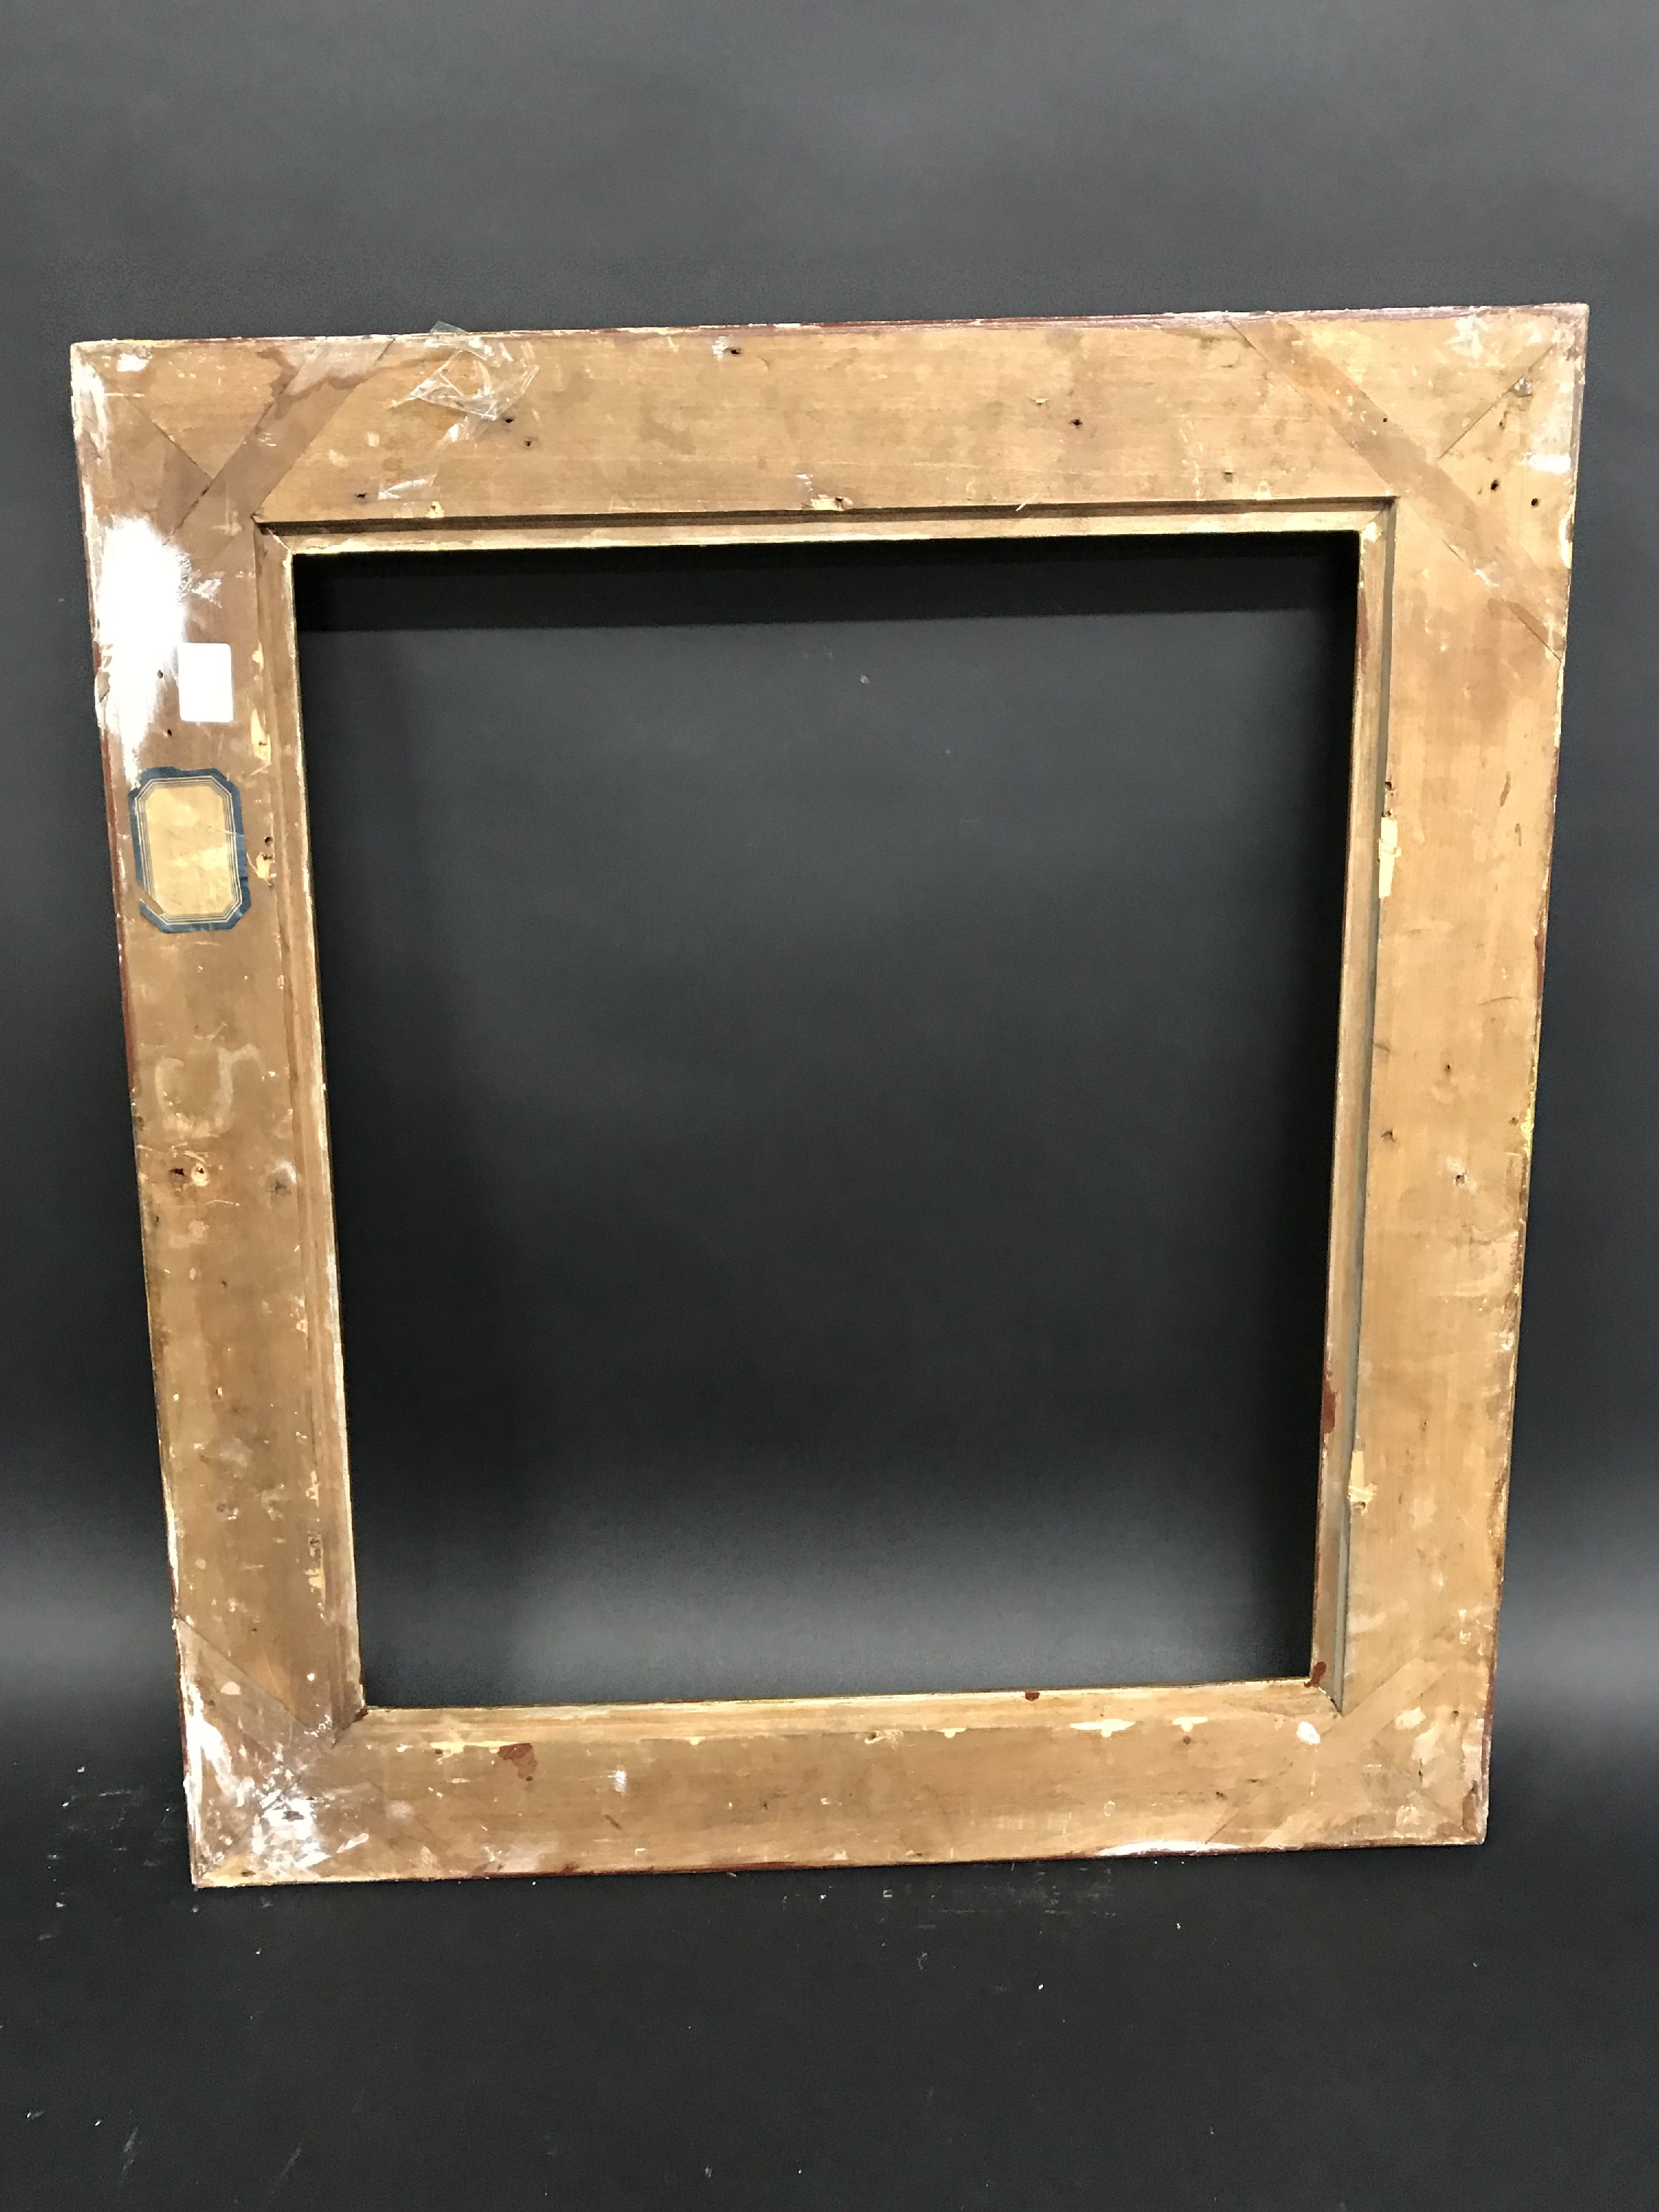 19th Century European School. A Gilt Composition Frame, with Swept Centres and Corners, 21.5" x 18. - Image 3 of 3